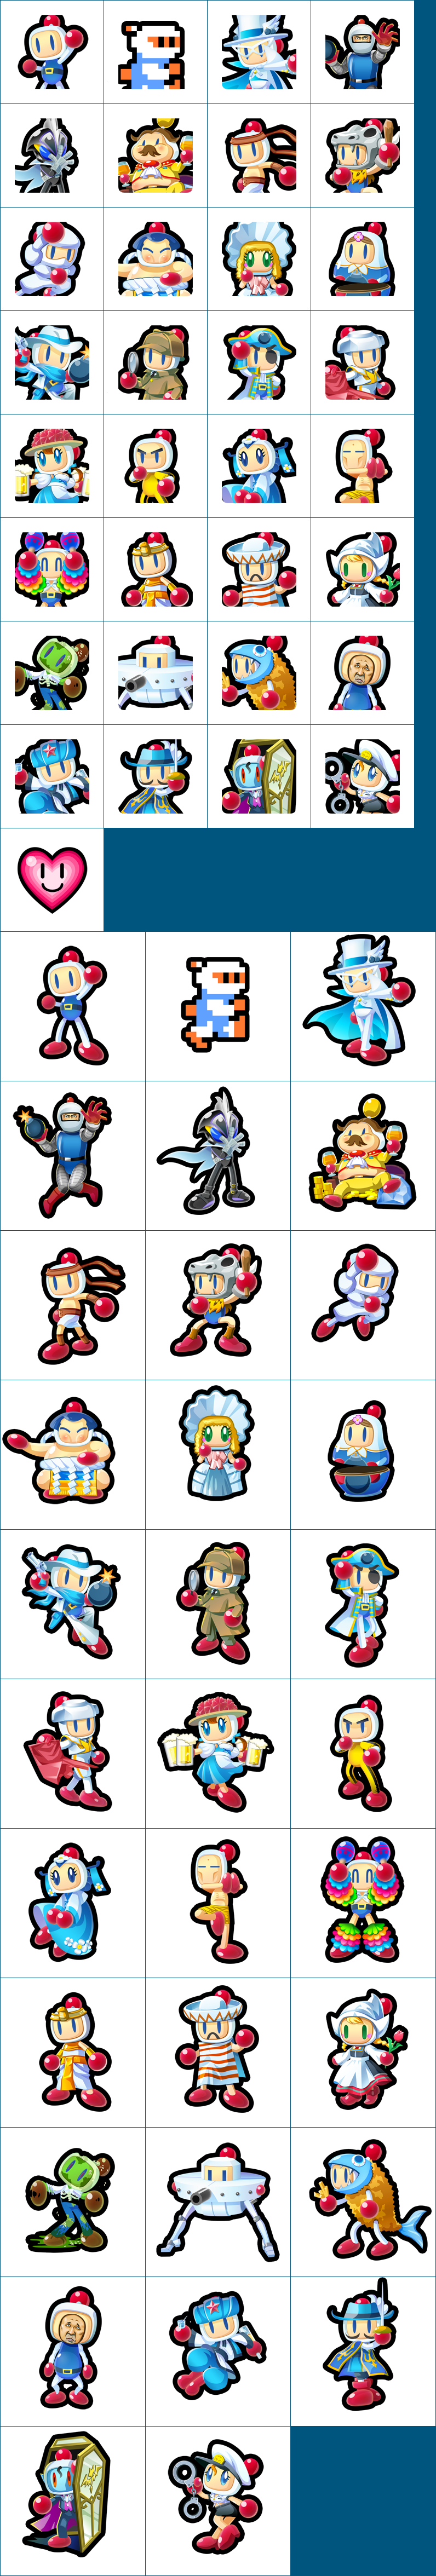 Bomberman for Android - Player Portraits and Icons